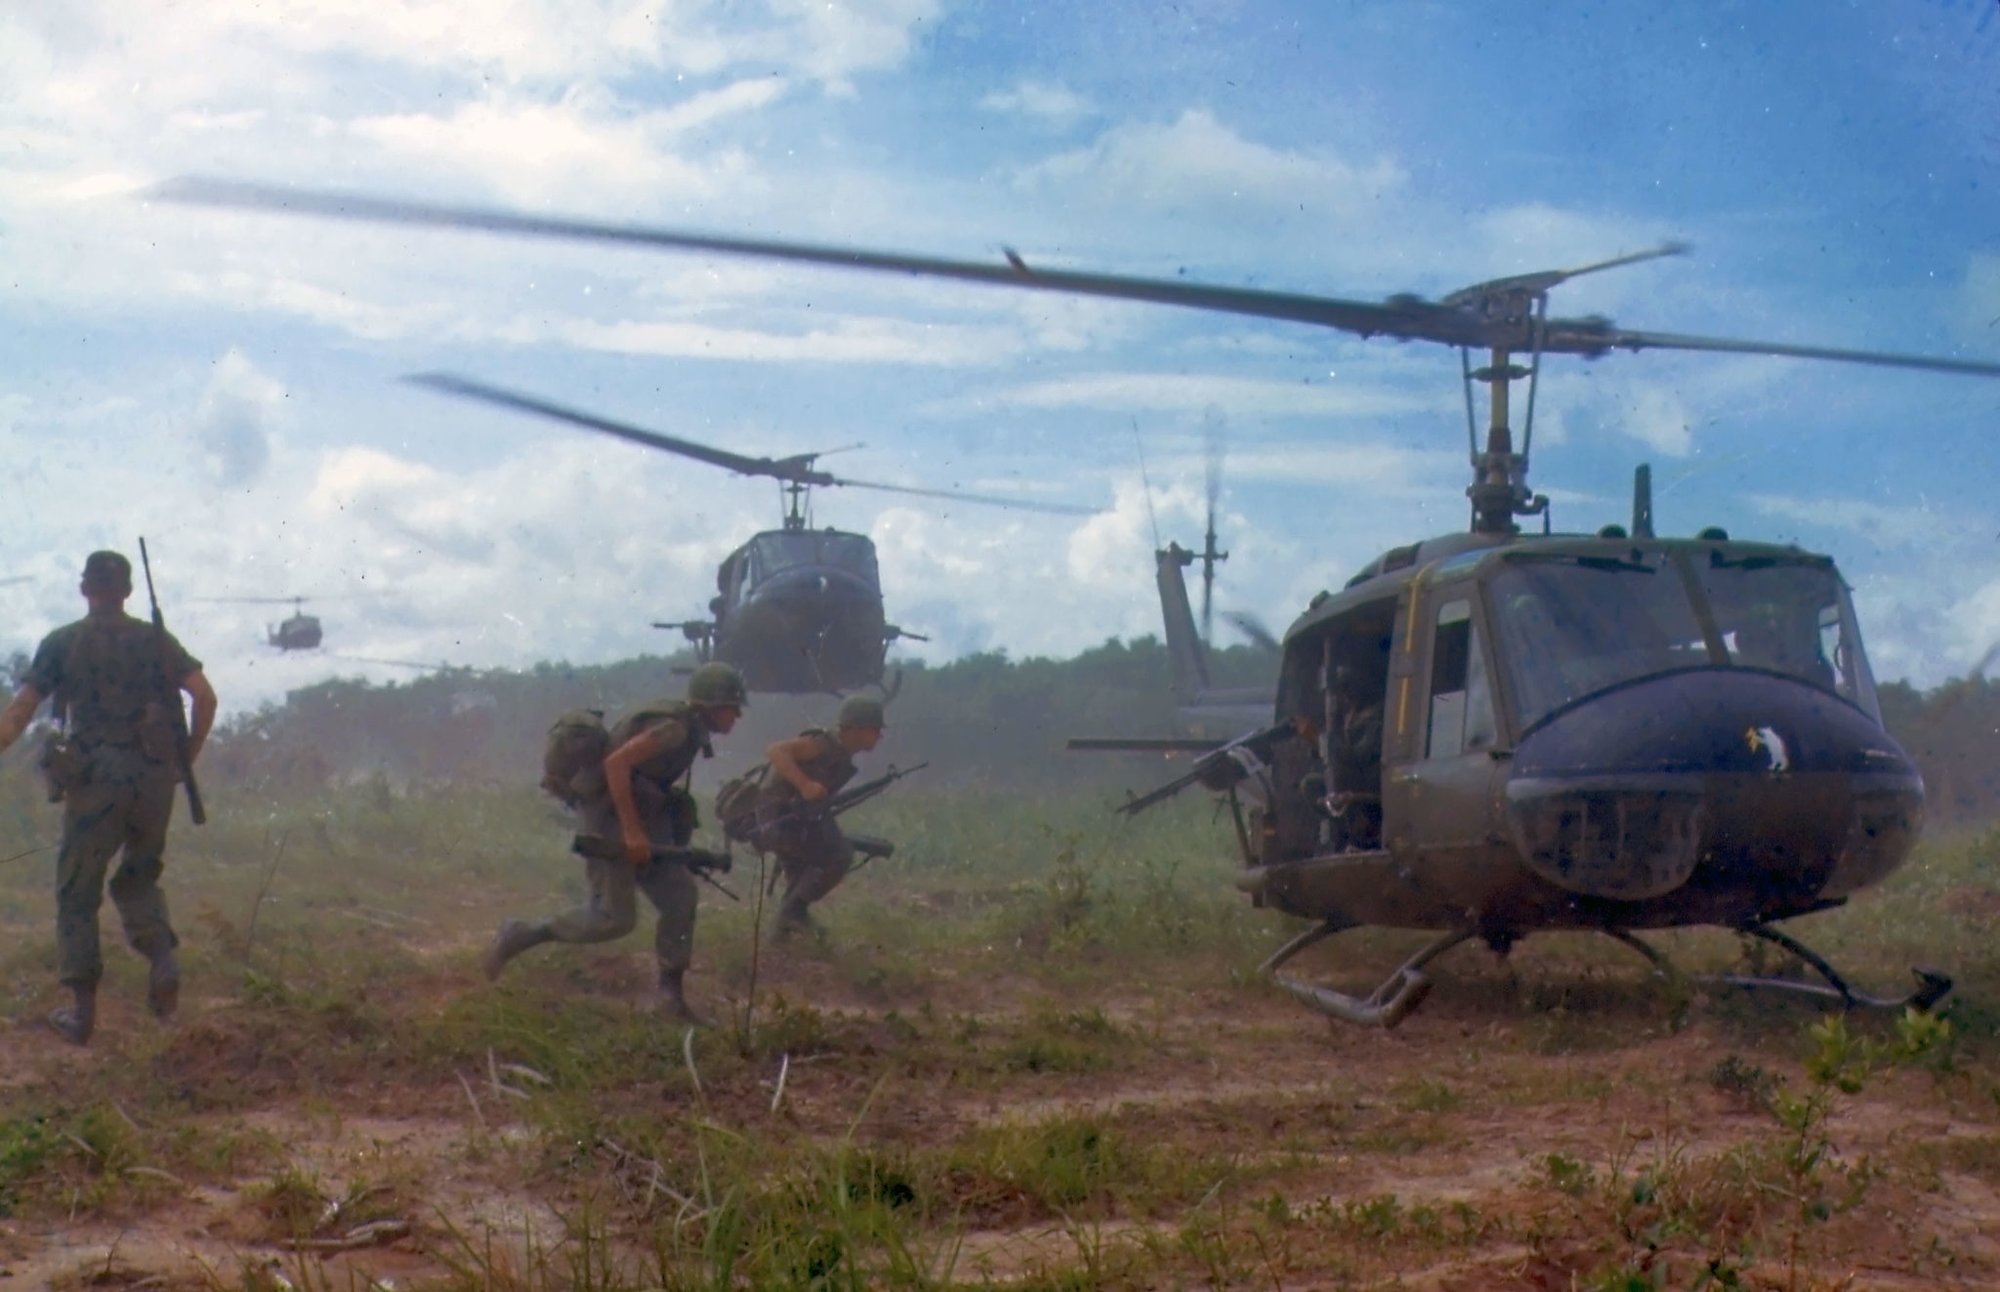 U.S. Army Bell UH-1D helicopters airlift members of the 2nd Battalion, 14th Infantry Regiment from the Filhol Rubber Plantation area to a new staging area, during Operation "Wahiawa," a search and destroy mission conducted by the 25th Infantry Division, northeast of Cu Chi, South Vietnam, 1966. Photo by SFC James K. F. Dung, courtesy of the National Archives and Records Administration.